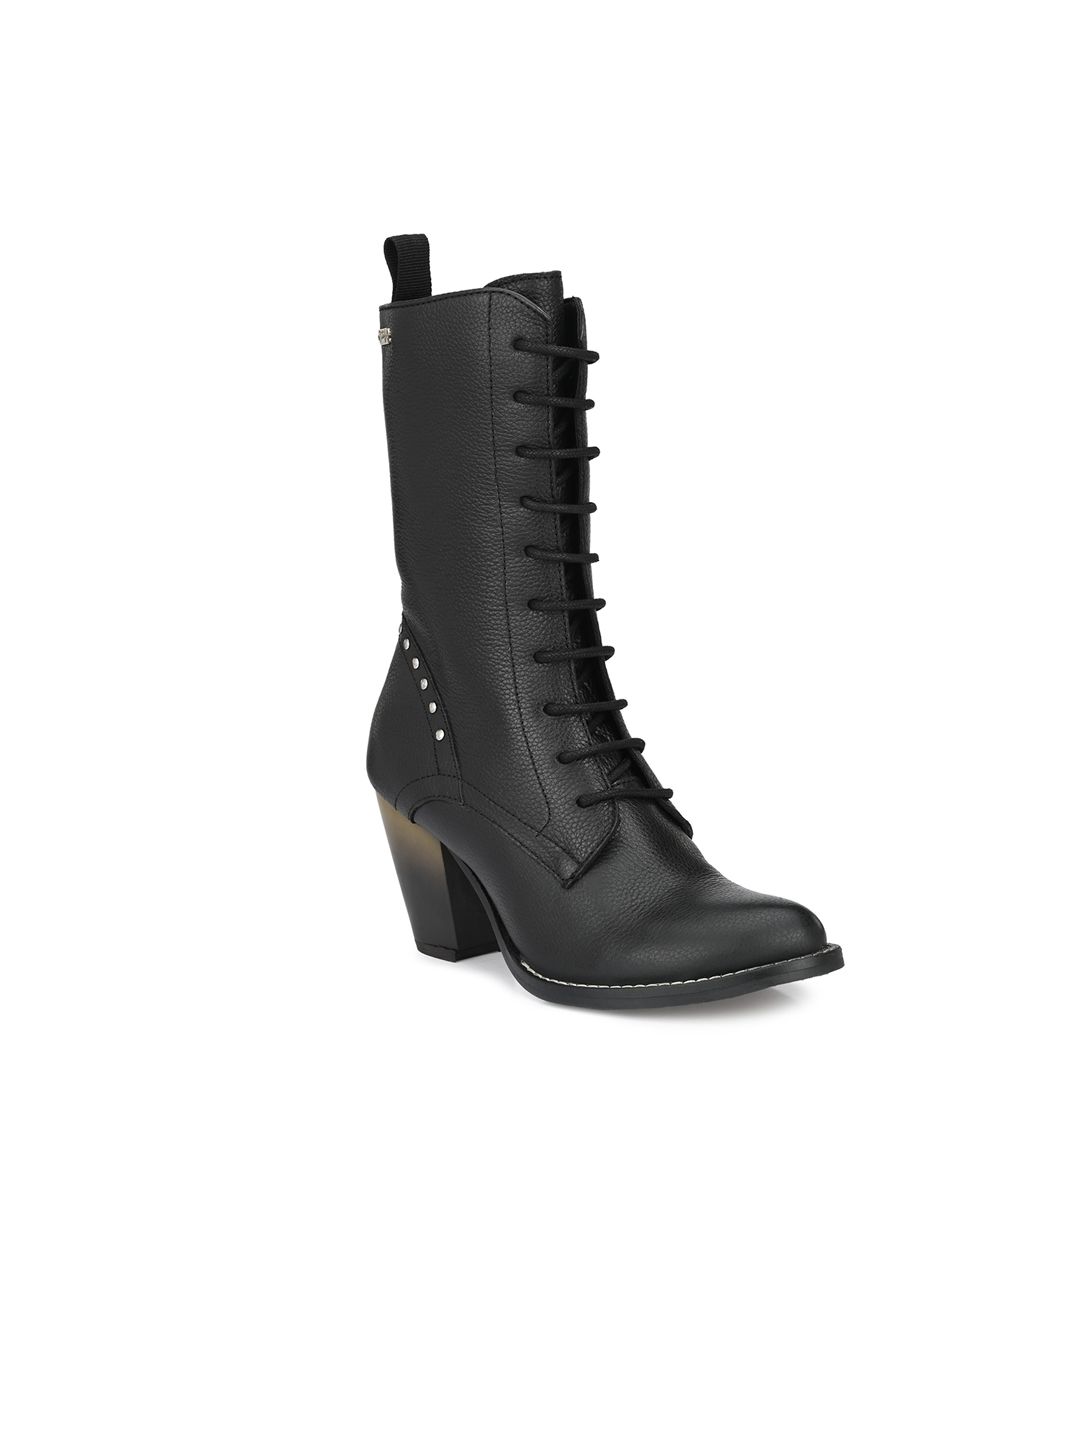 Delize Woman Black High-Top Block Heeled Boots Price in India